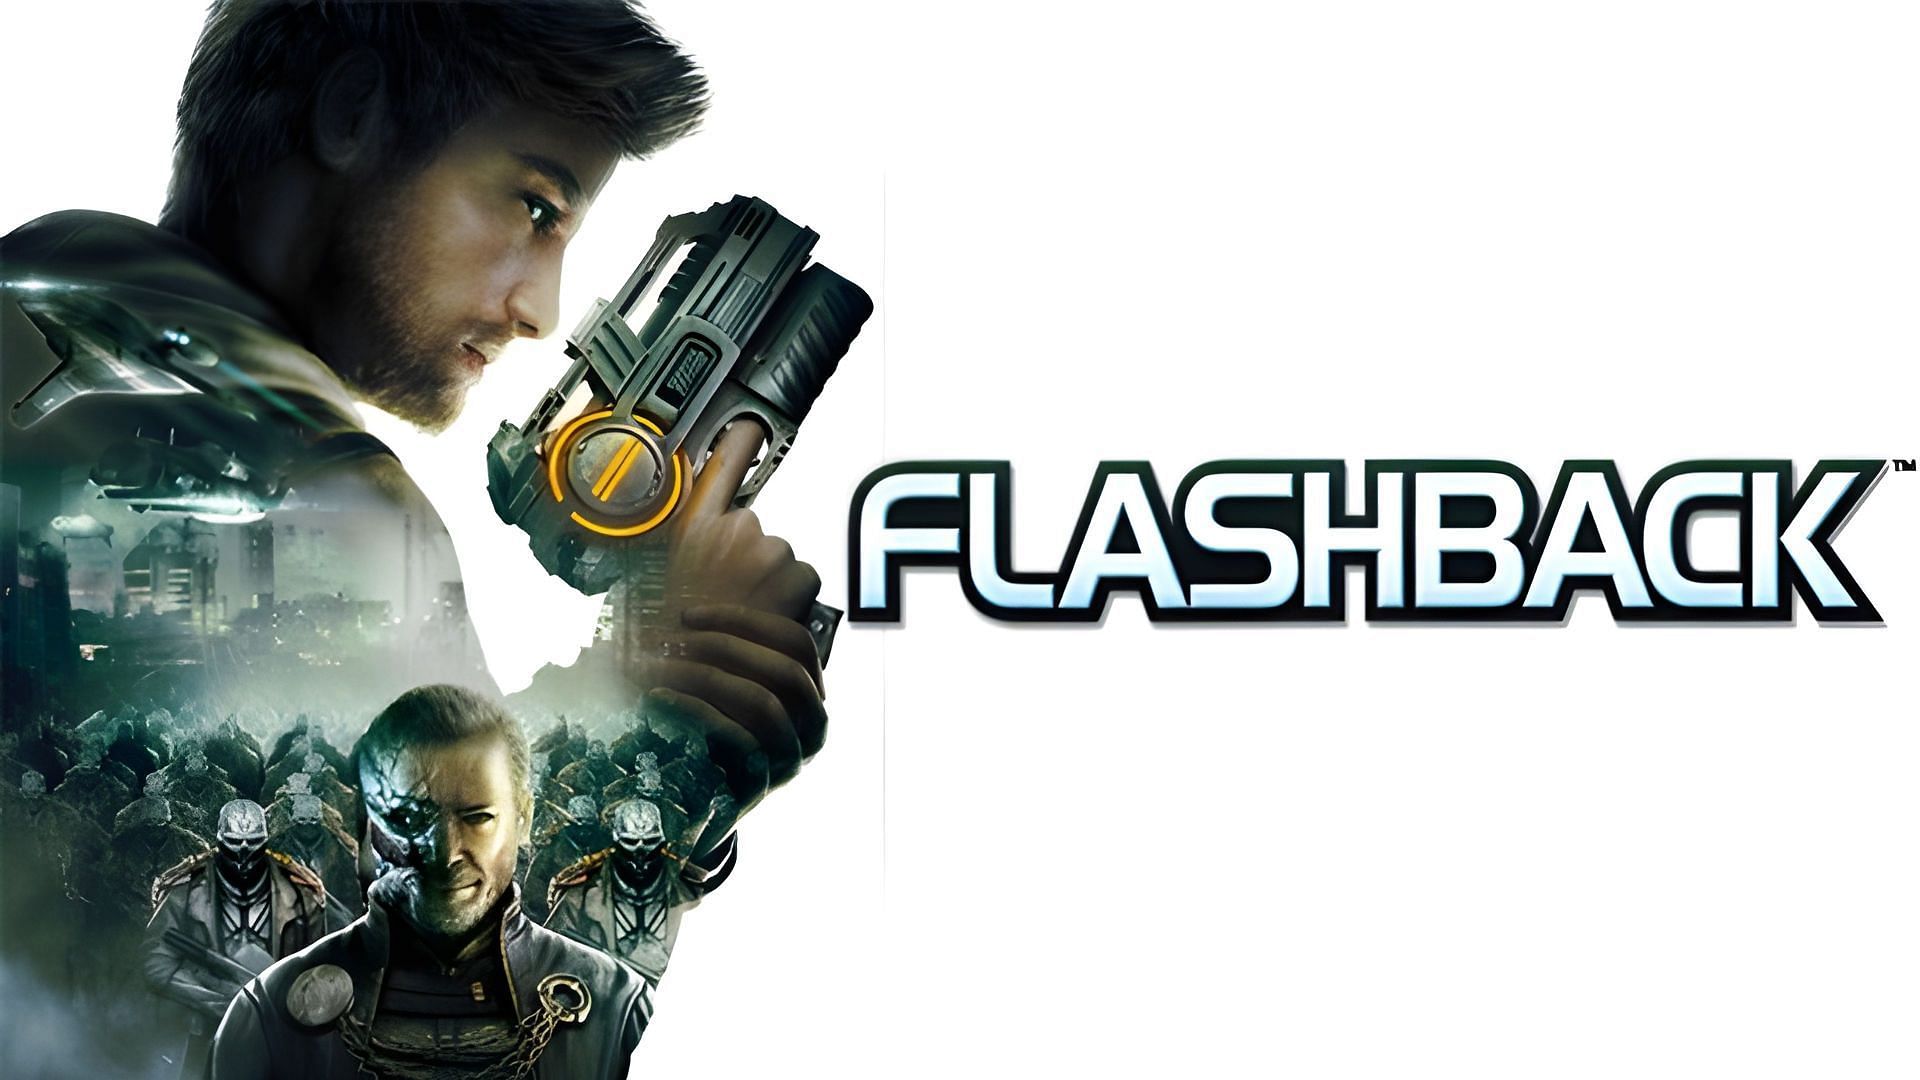 Flashback was not rebooted, it was reimagined (Image via Ubisoft)